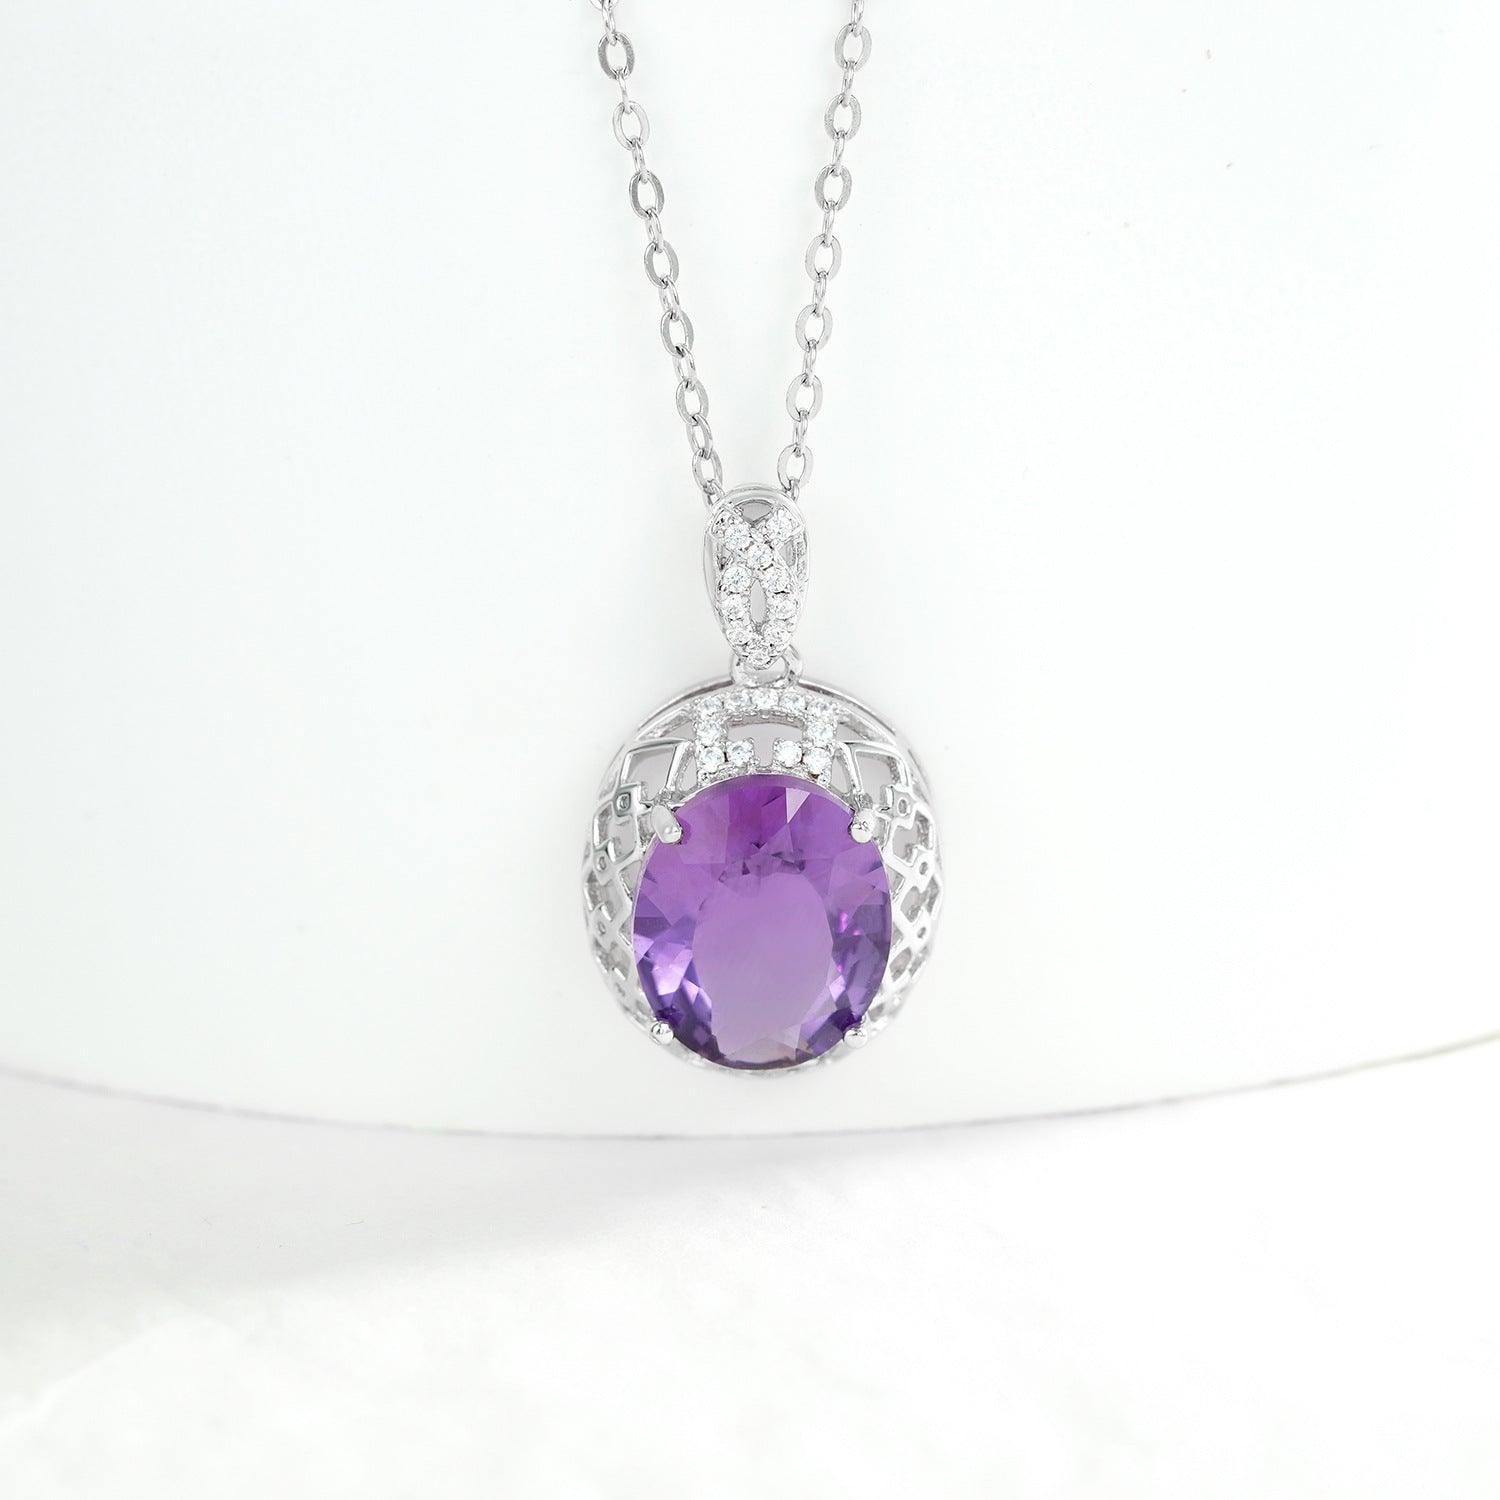 High-grade Amethyst Pendant Necklace in 2023 | High-grade Amethyst Pendant Necklace - undefined | Amethyst Pendant Necklace, High-grade Amethyst Necklace, Sterling Silver s925 necklace | From Hunny Life | hunnylife.com